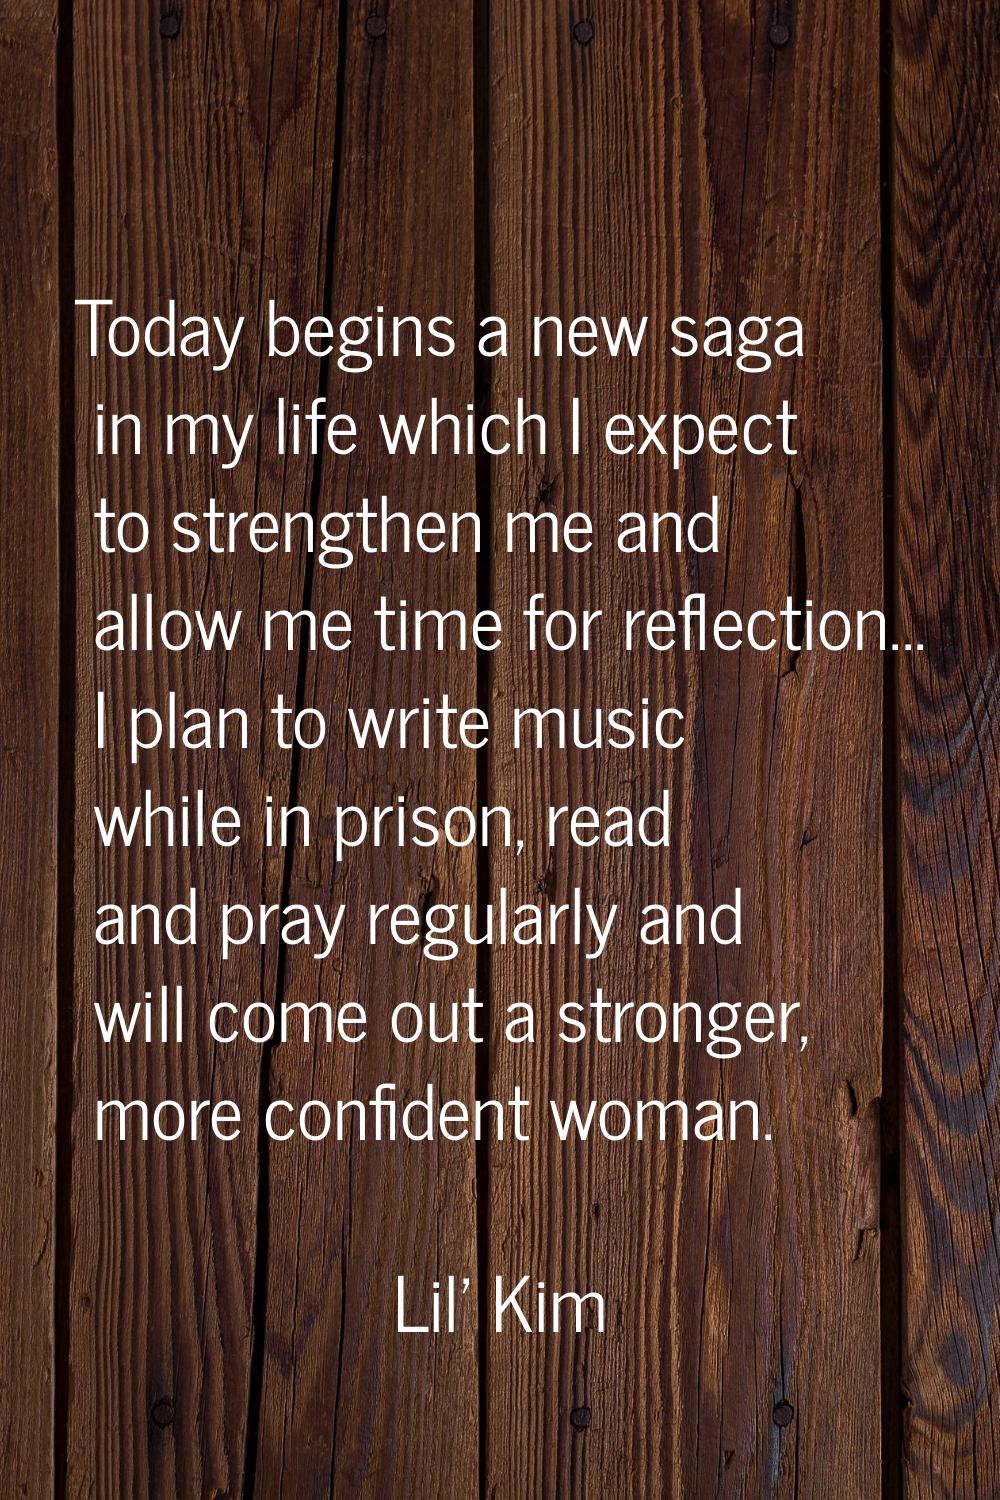 Today begins a new saga in my life which I expect to strengthen me and allow me time for reflection